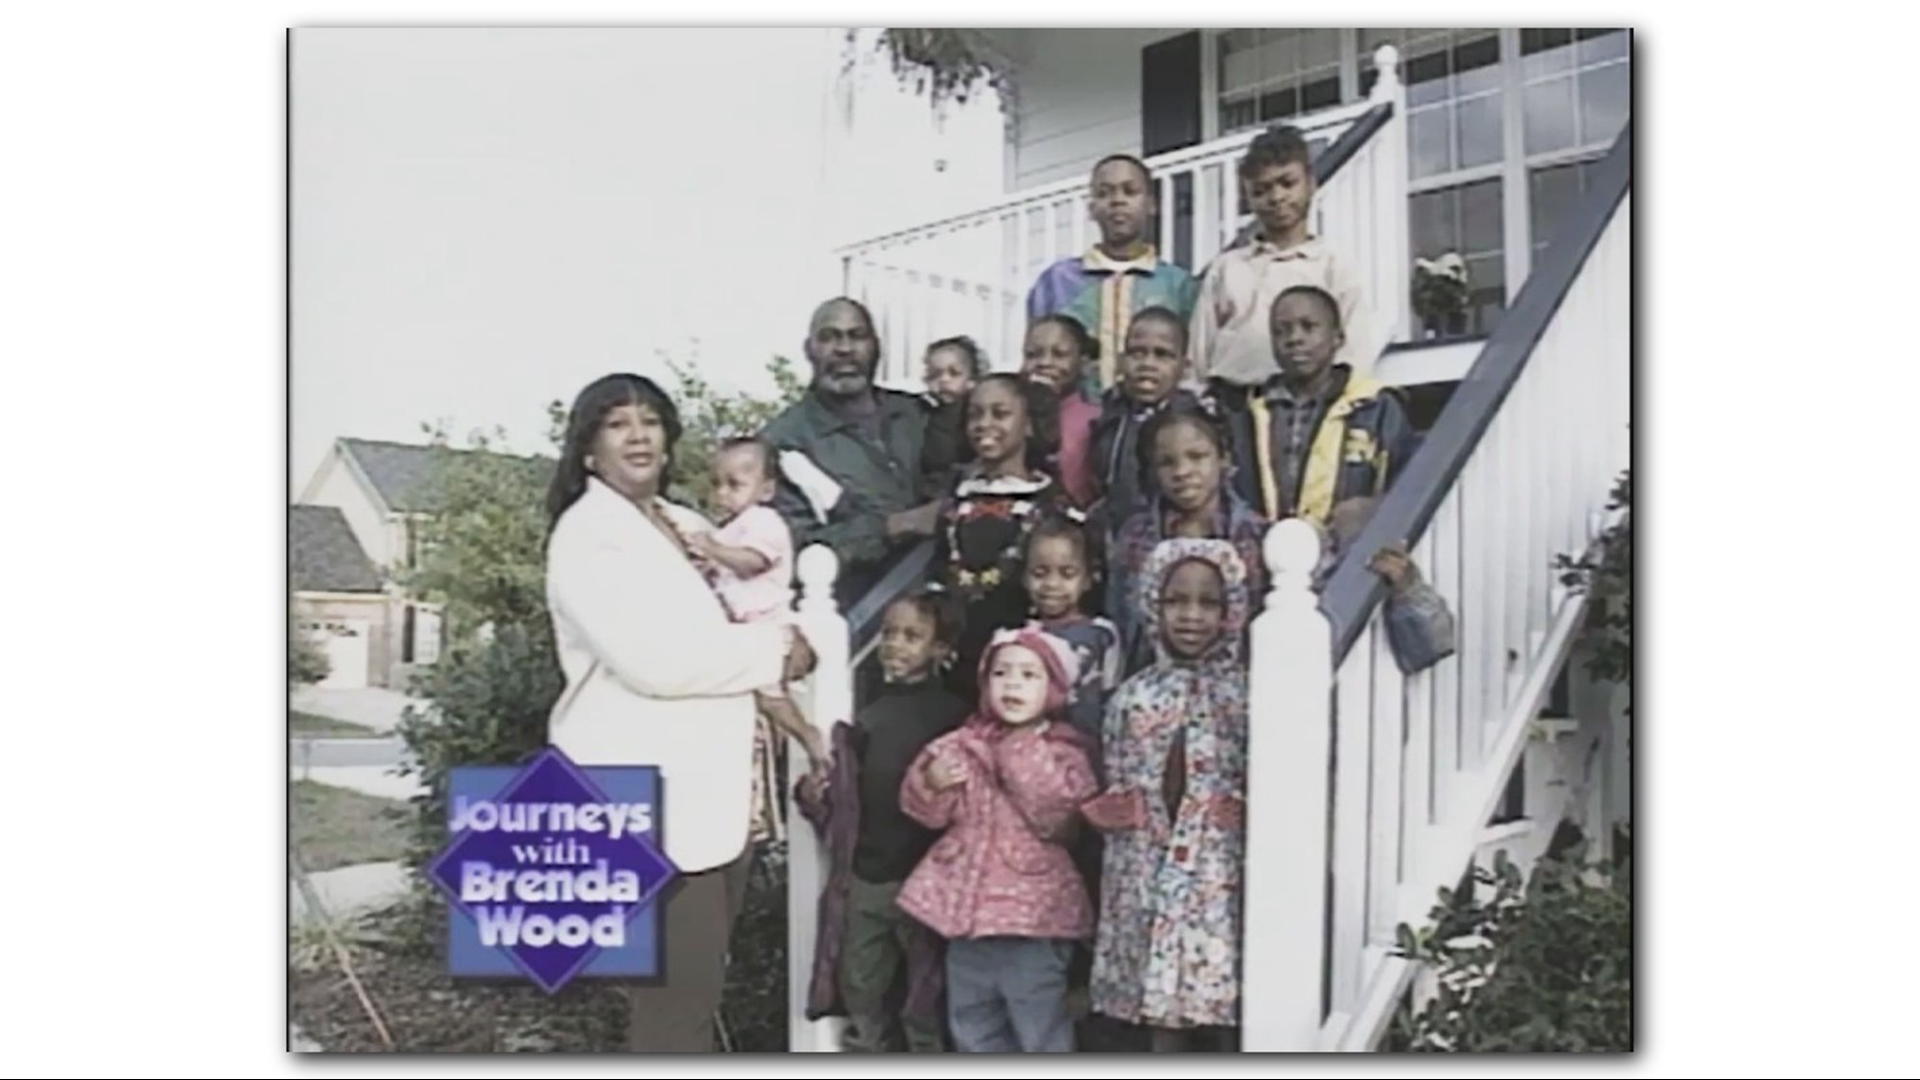 Rudolph and Veronica Long took in 12 children - 8 grandchildren and 4 nieces and nephews - in 1994. The children's parents were addicted to crack and the Longs stepped in to provide a loving home.